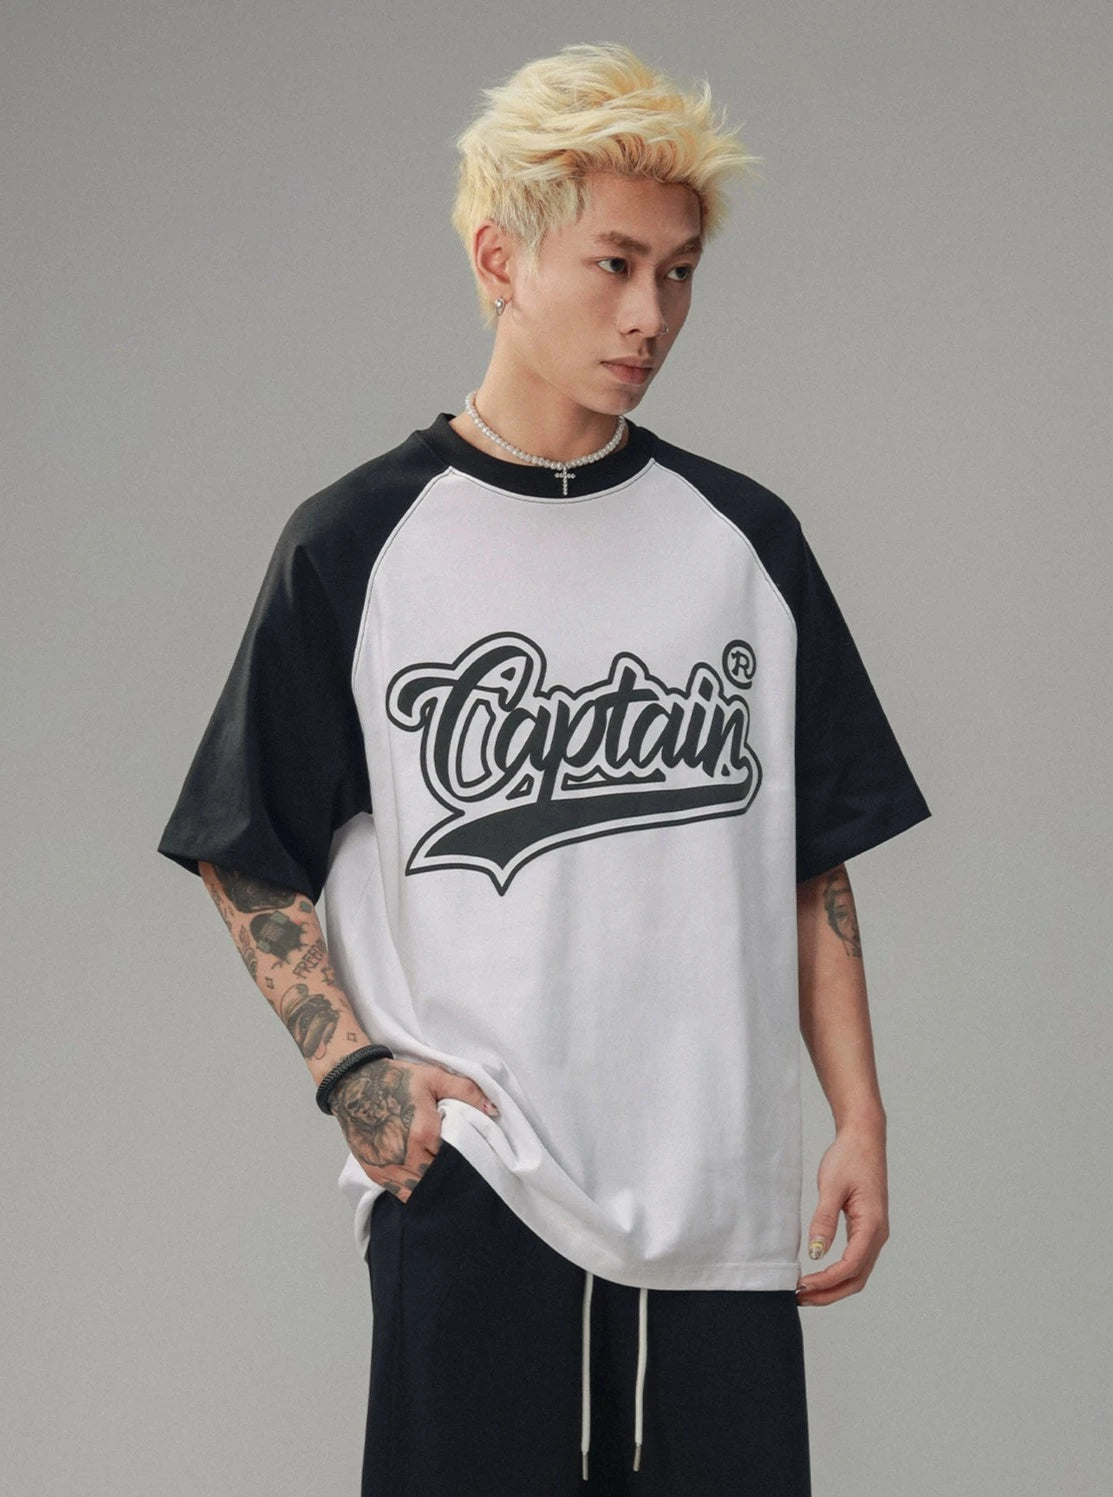 CaptainPeer Letter Tee - Limited Offer Top